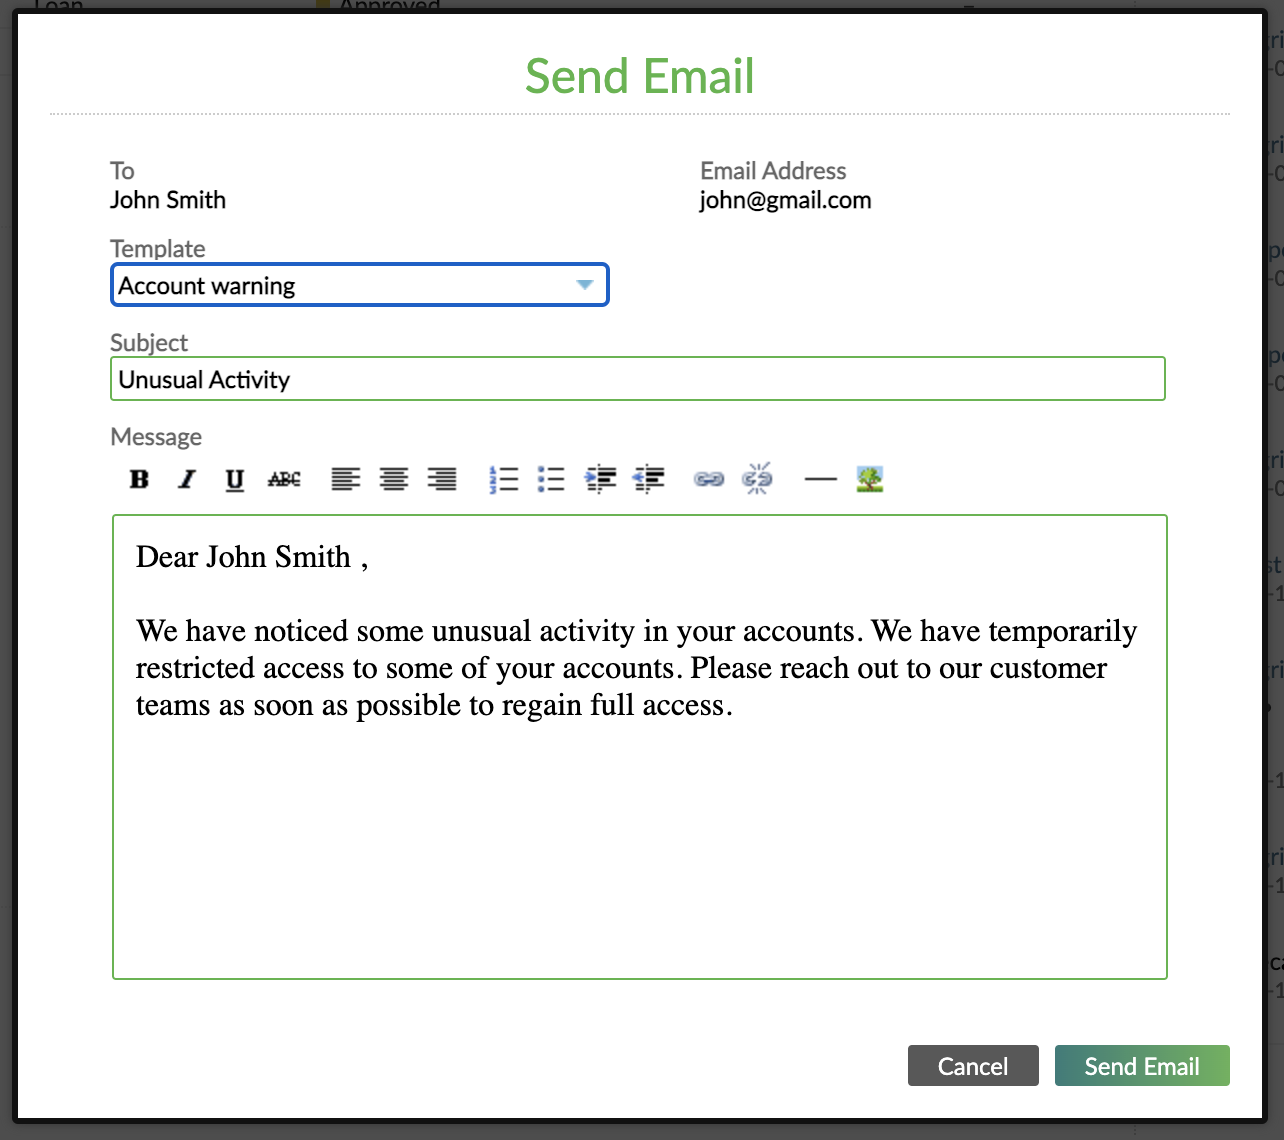 Send Email dialog with fields